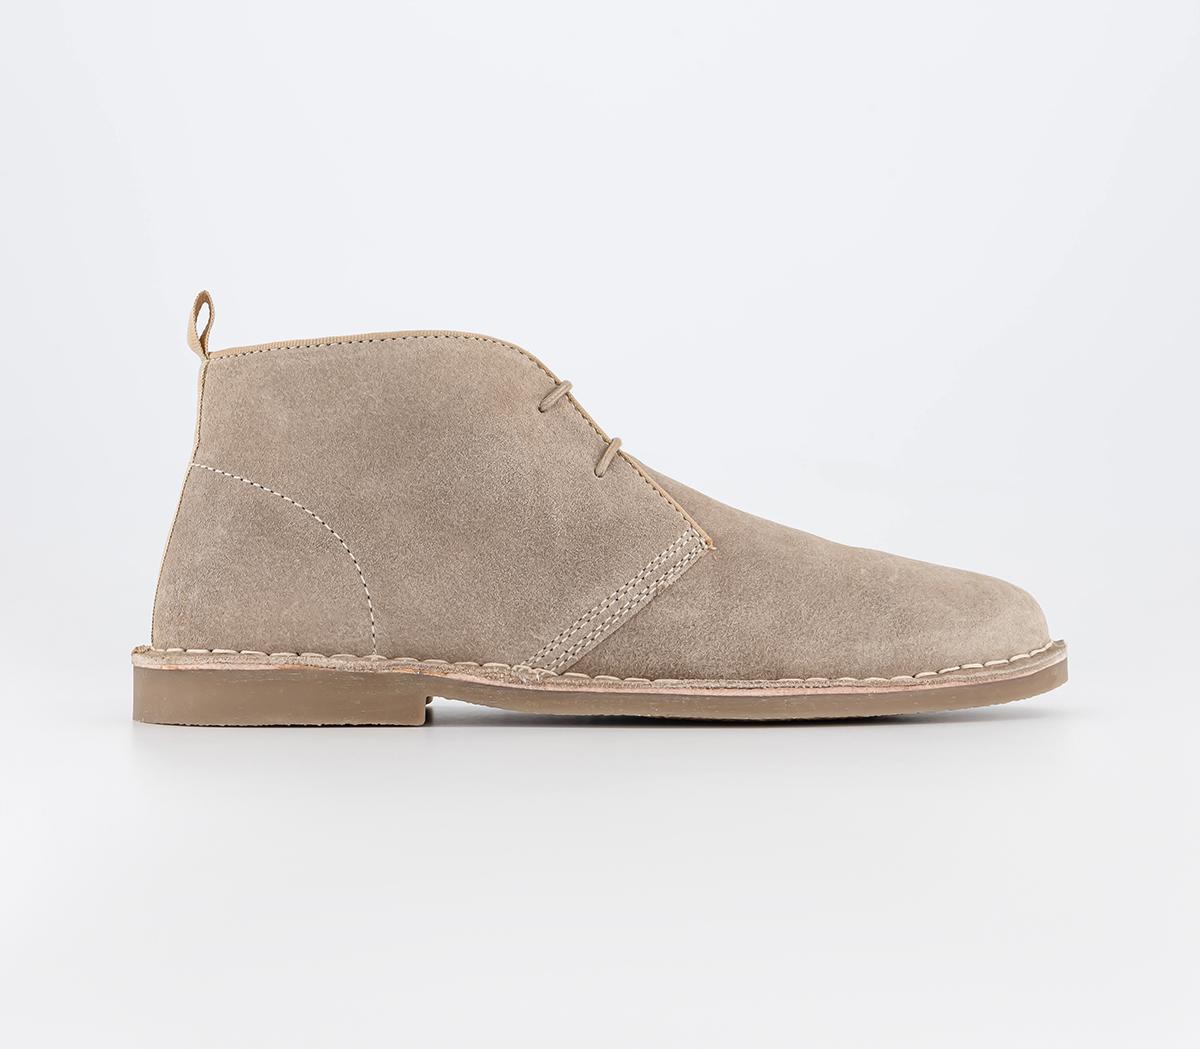 OFFICE Battuta Crepe Look Boots Taupe Suede - Men’s Boots